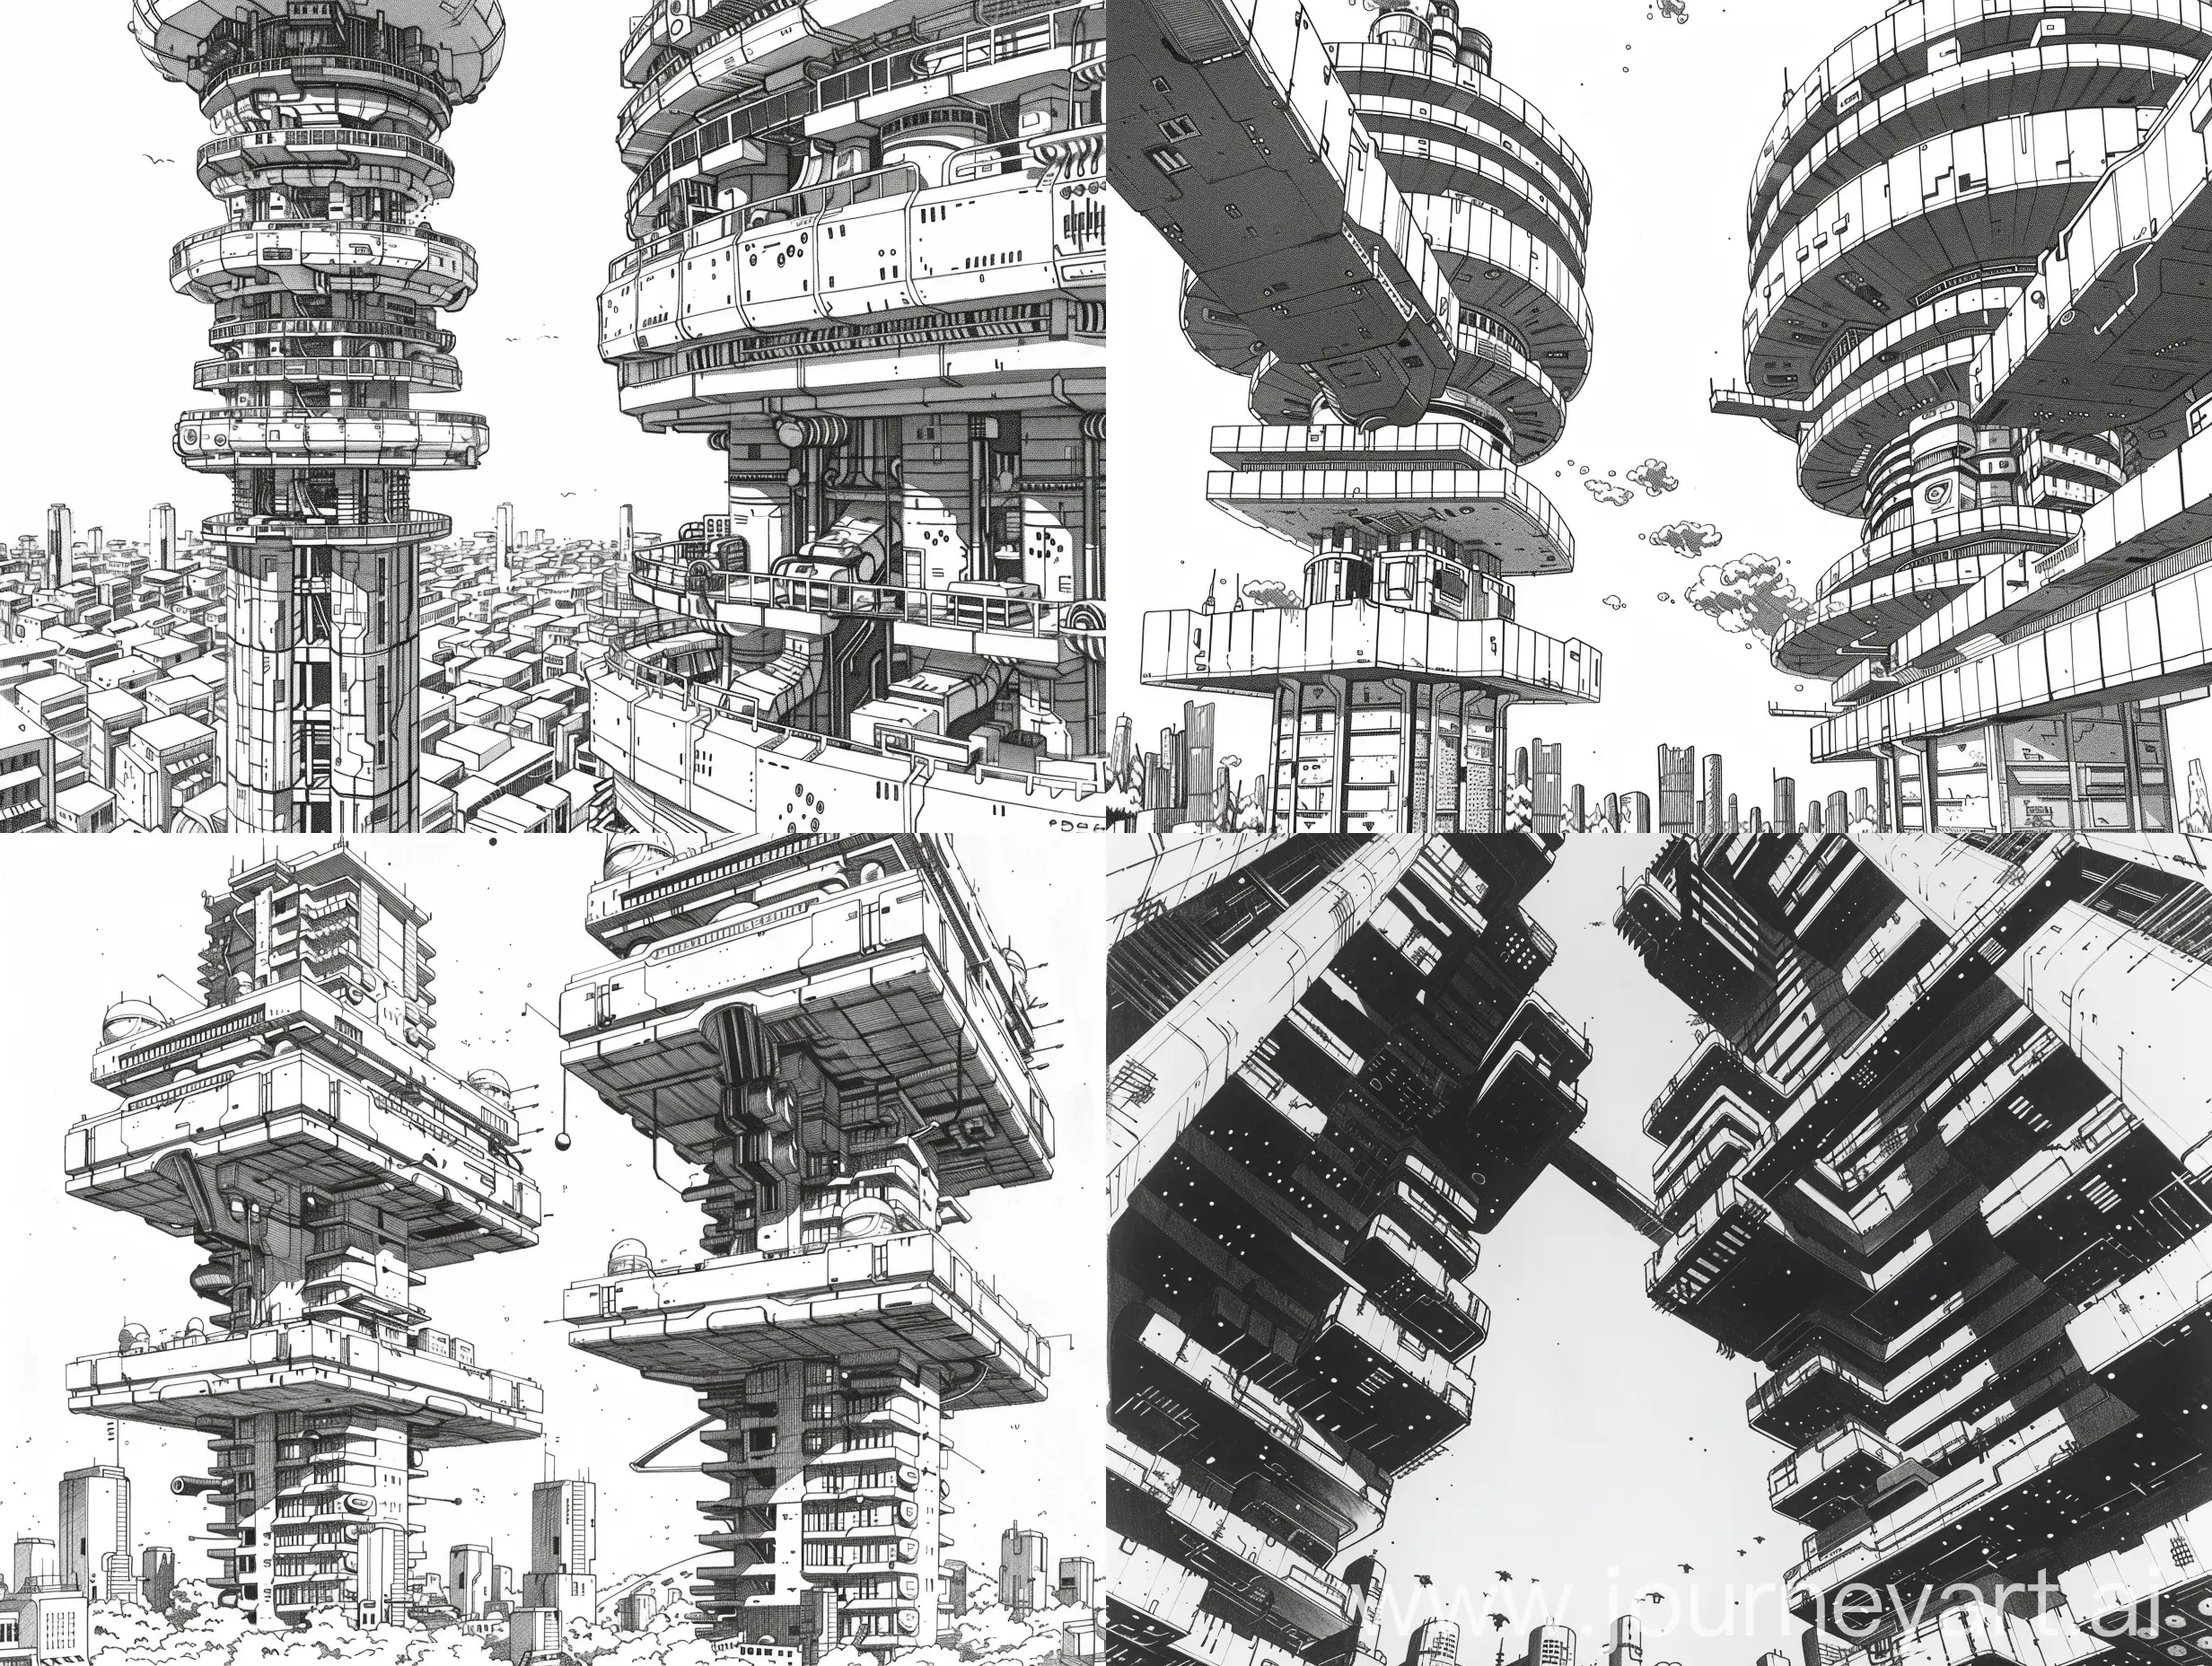 manga black and white drawing, background, perspective, sci fi city, two towers with overhanging terraced floors